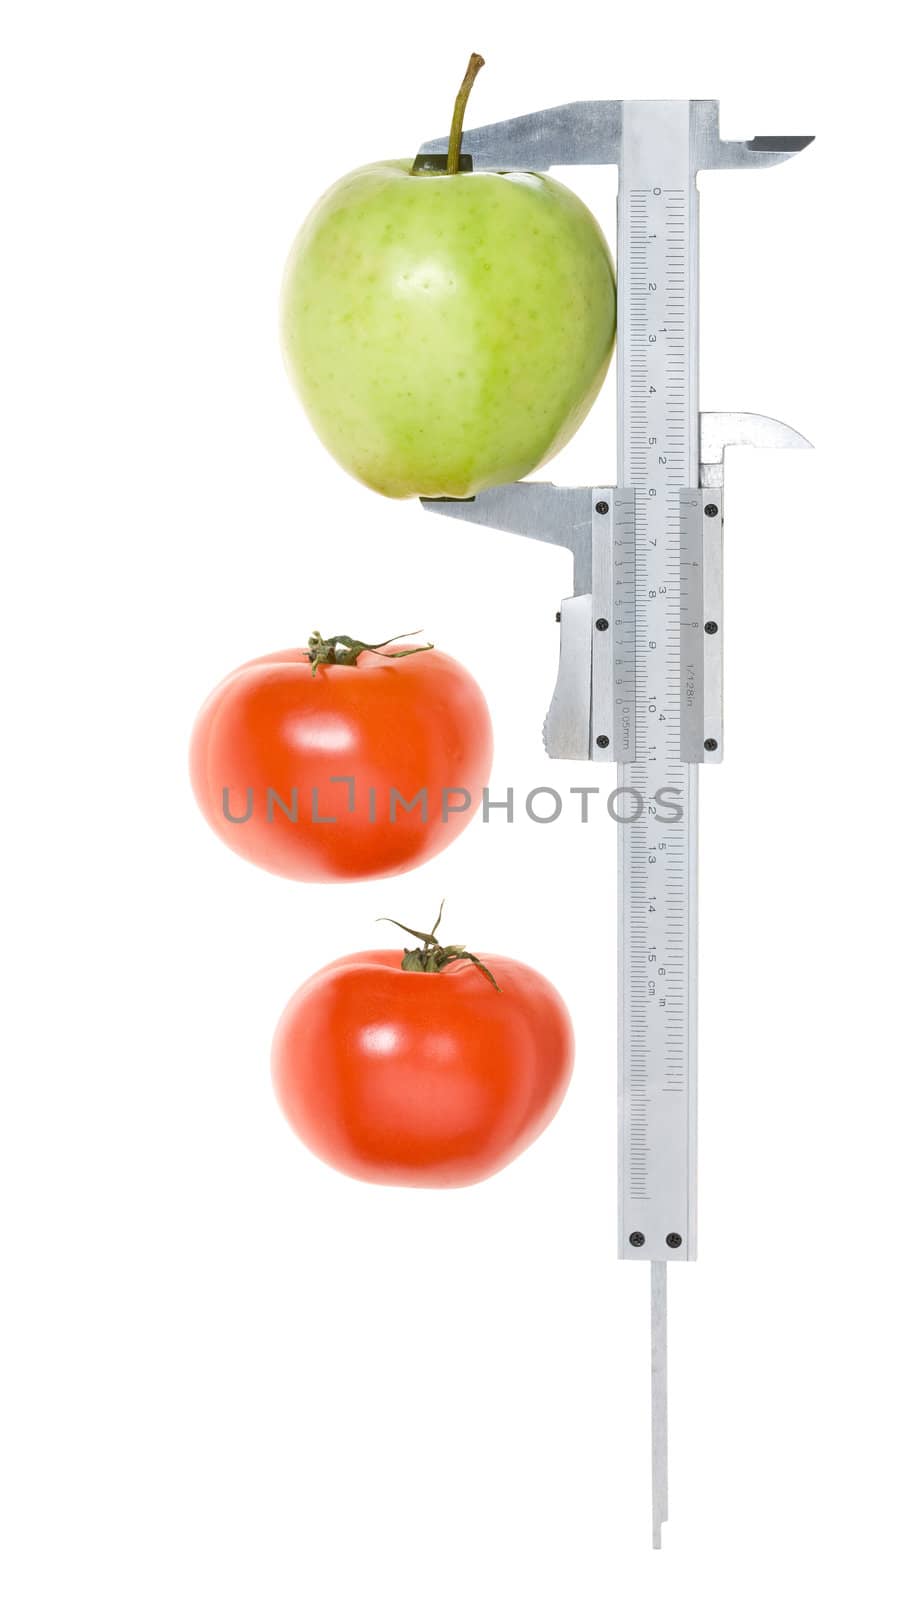 Trimmel with apple and tomato isolated on white. Clipping paths